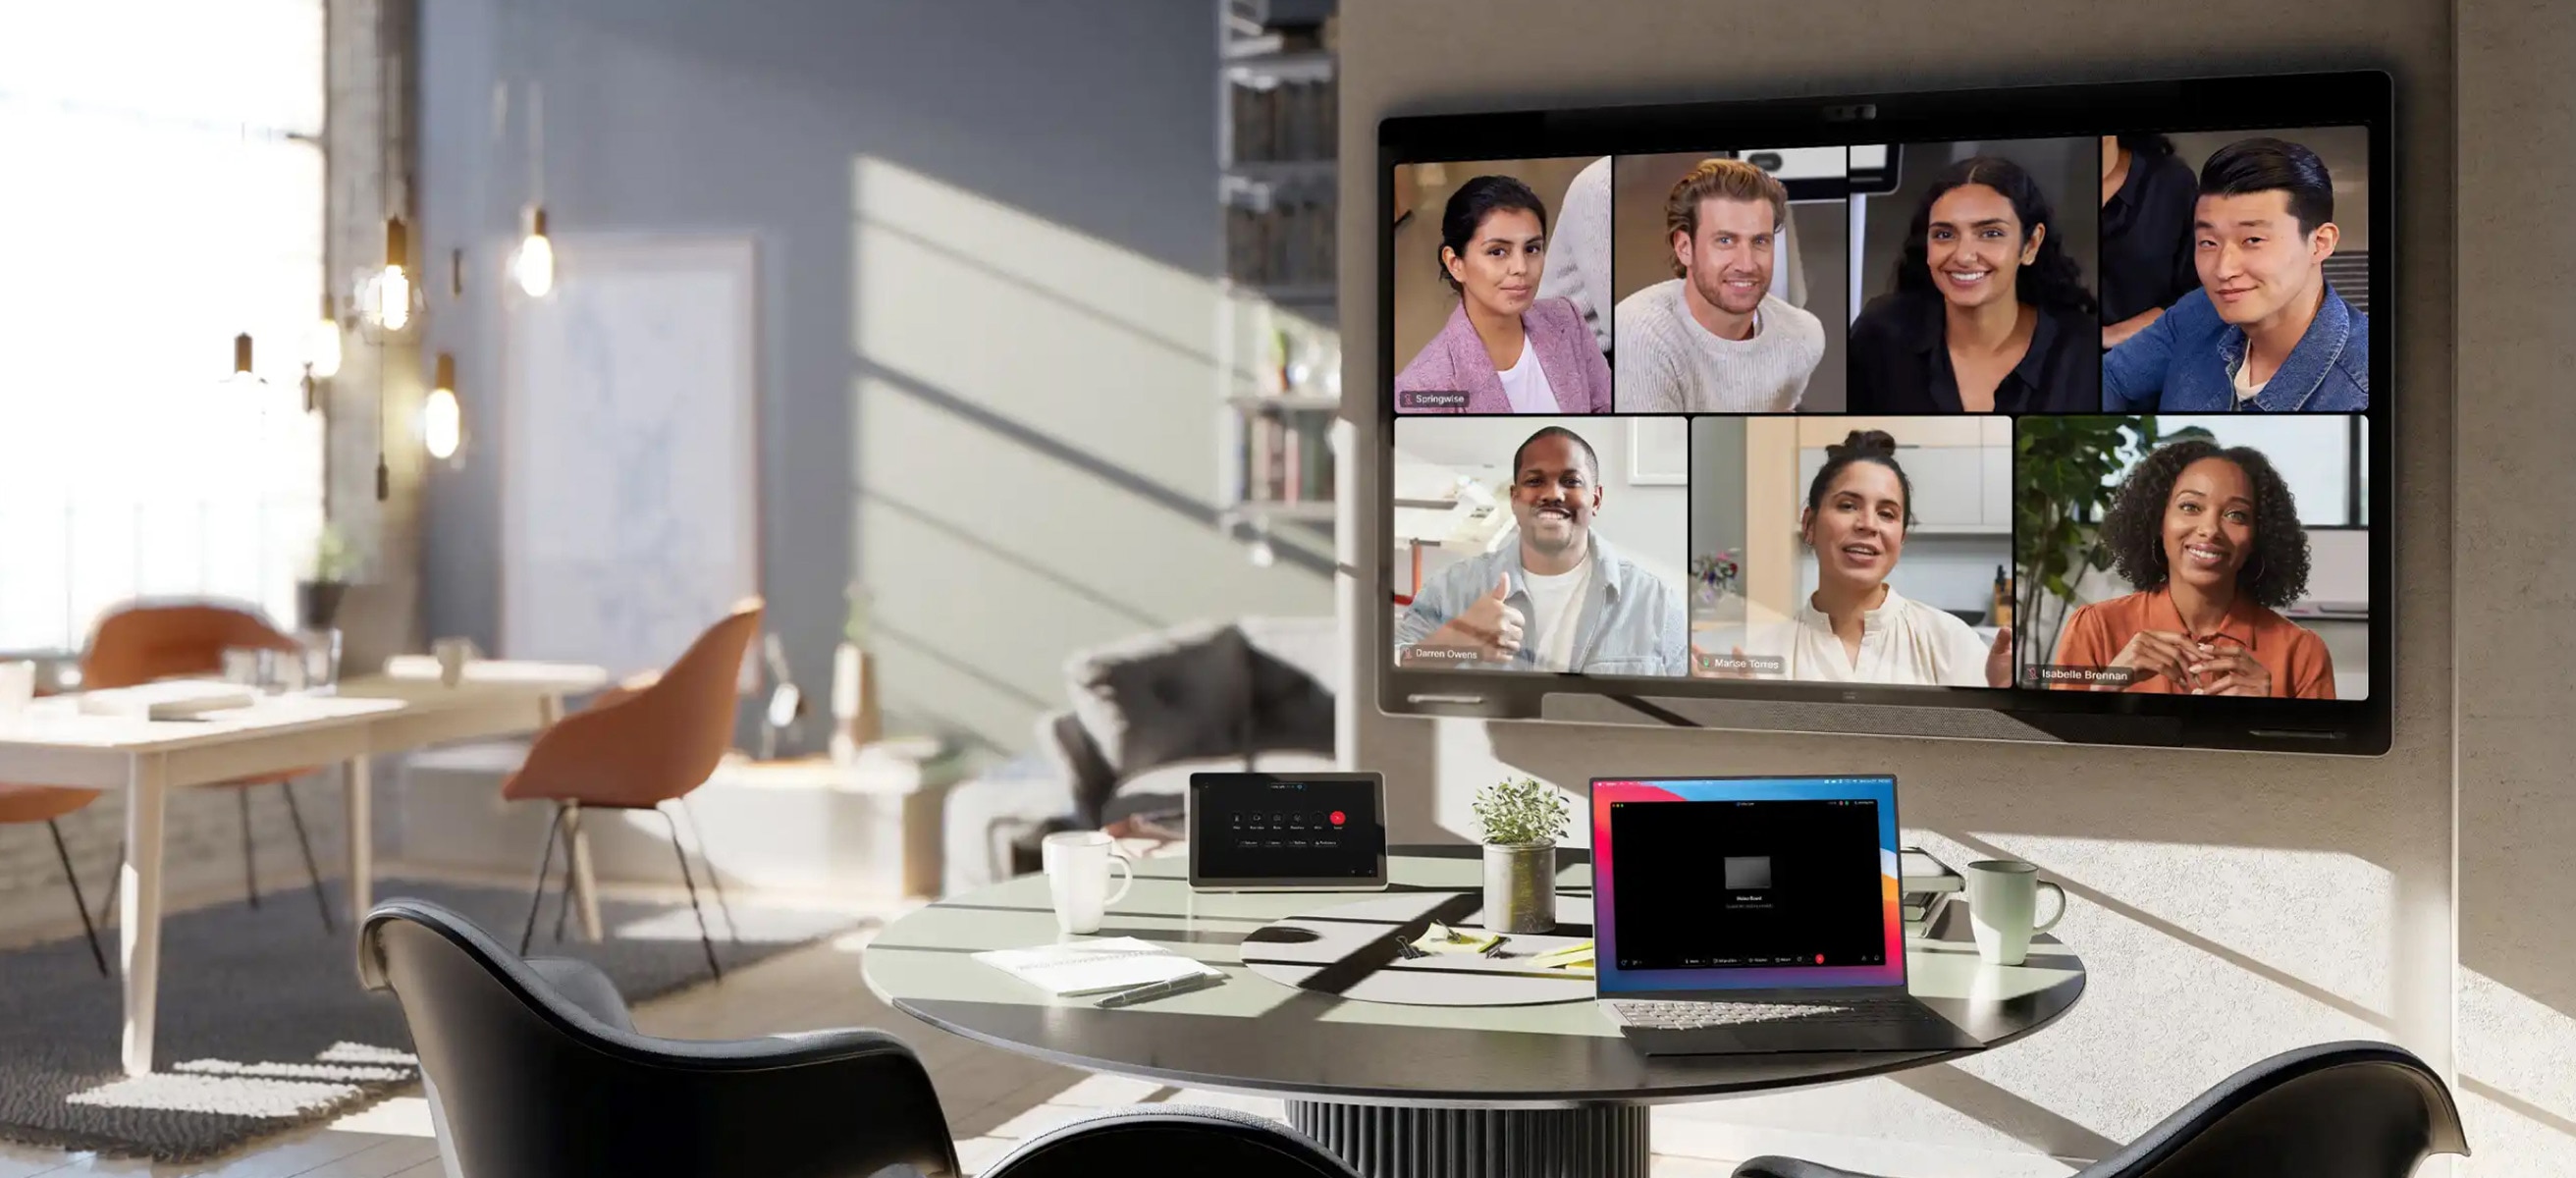 Video conference launches in open meeting space using Cisco Devices and intelligent camera frames view.